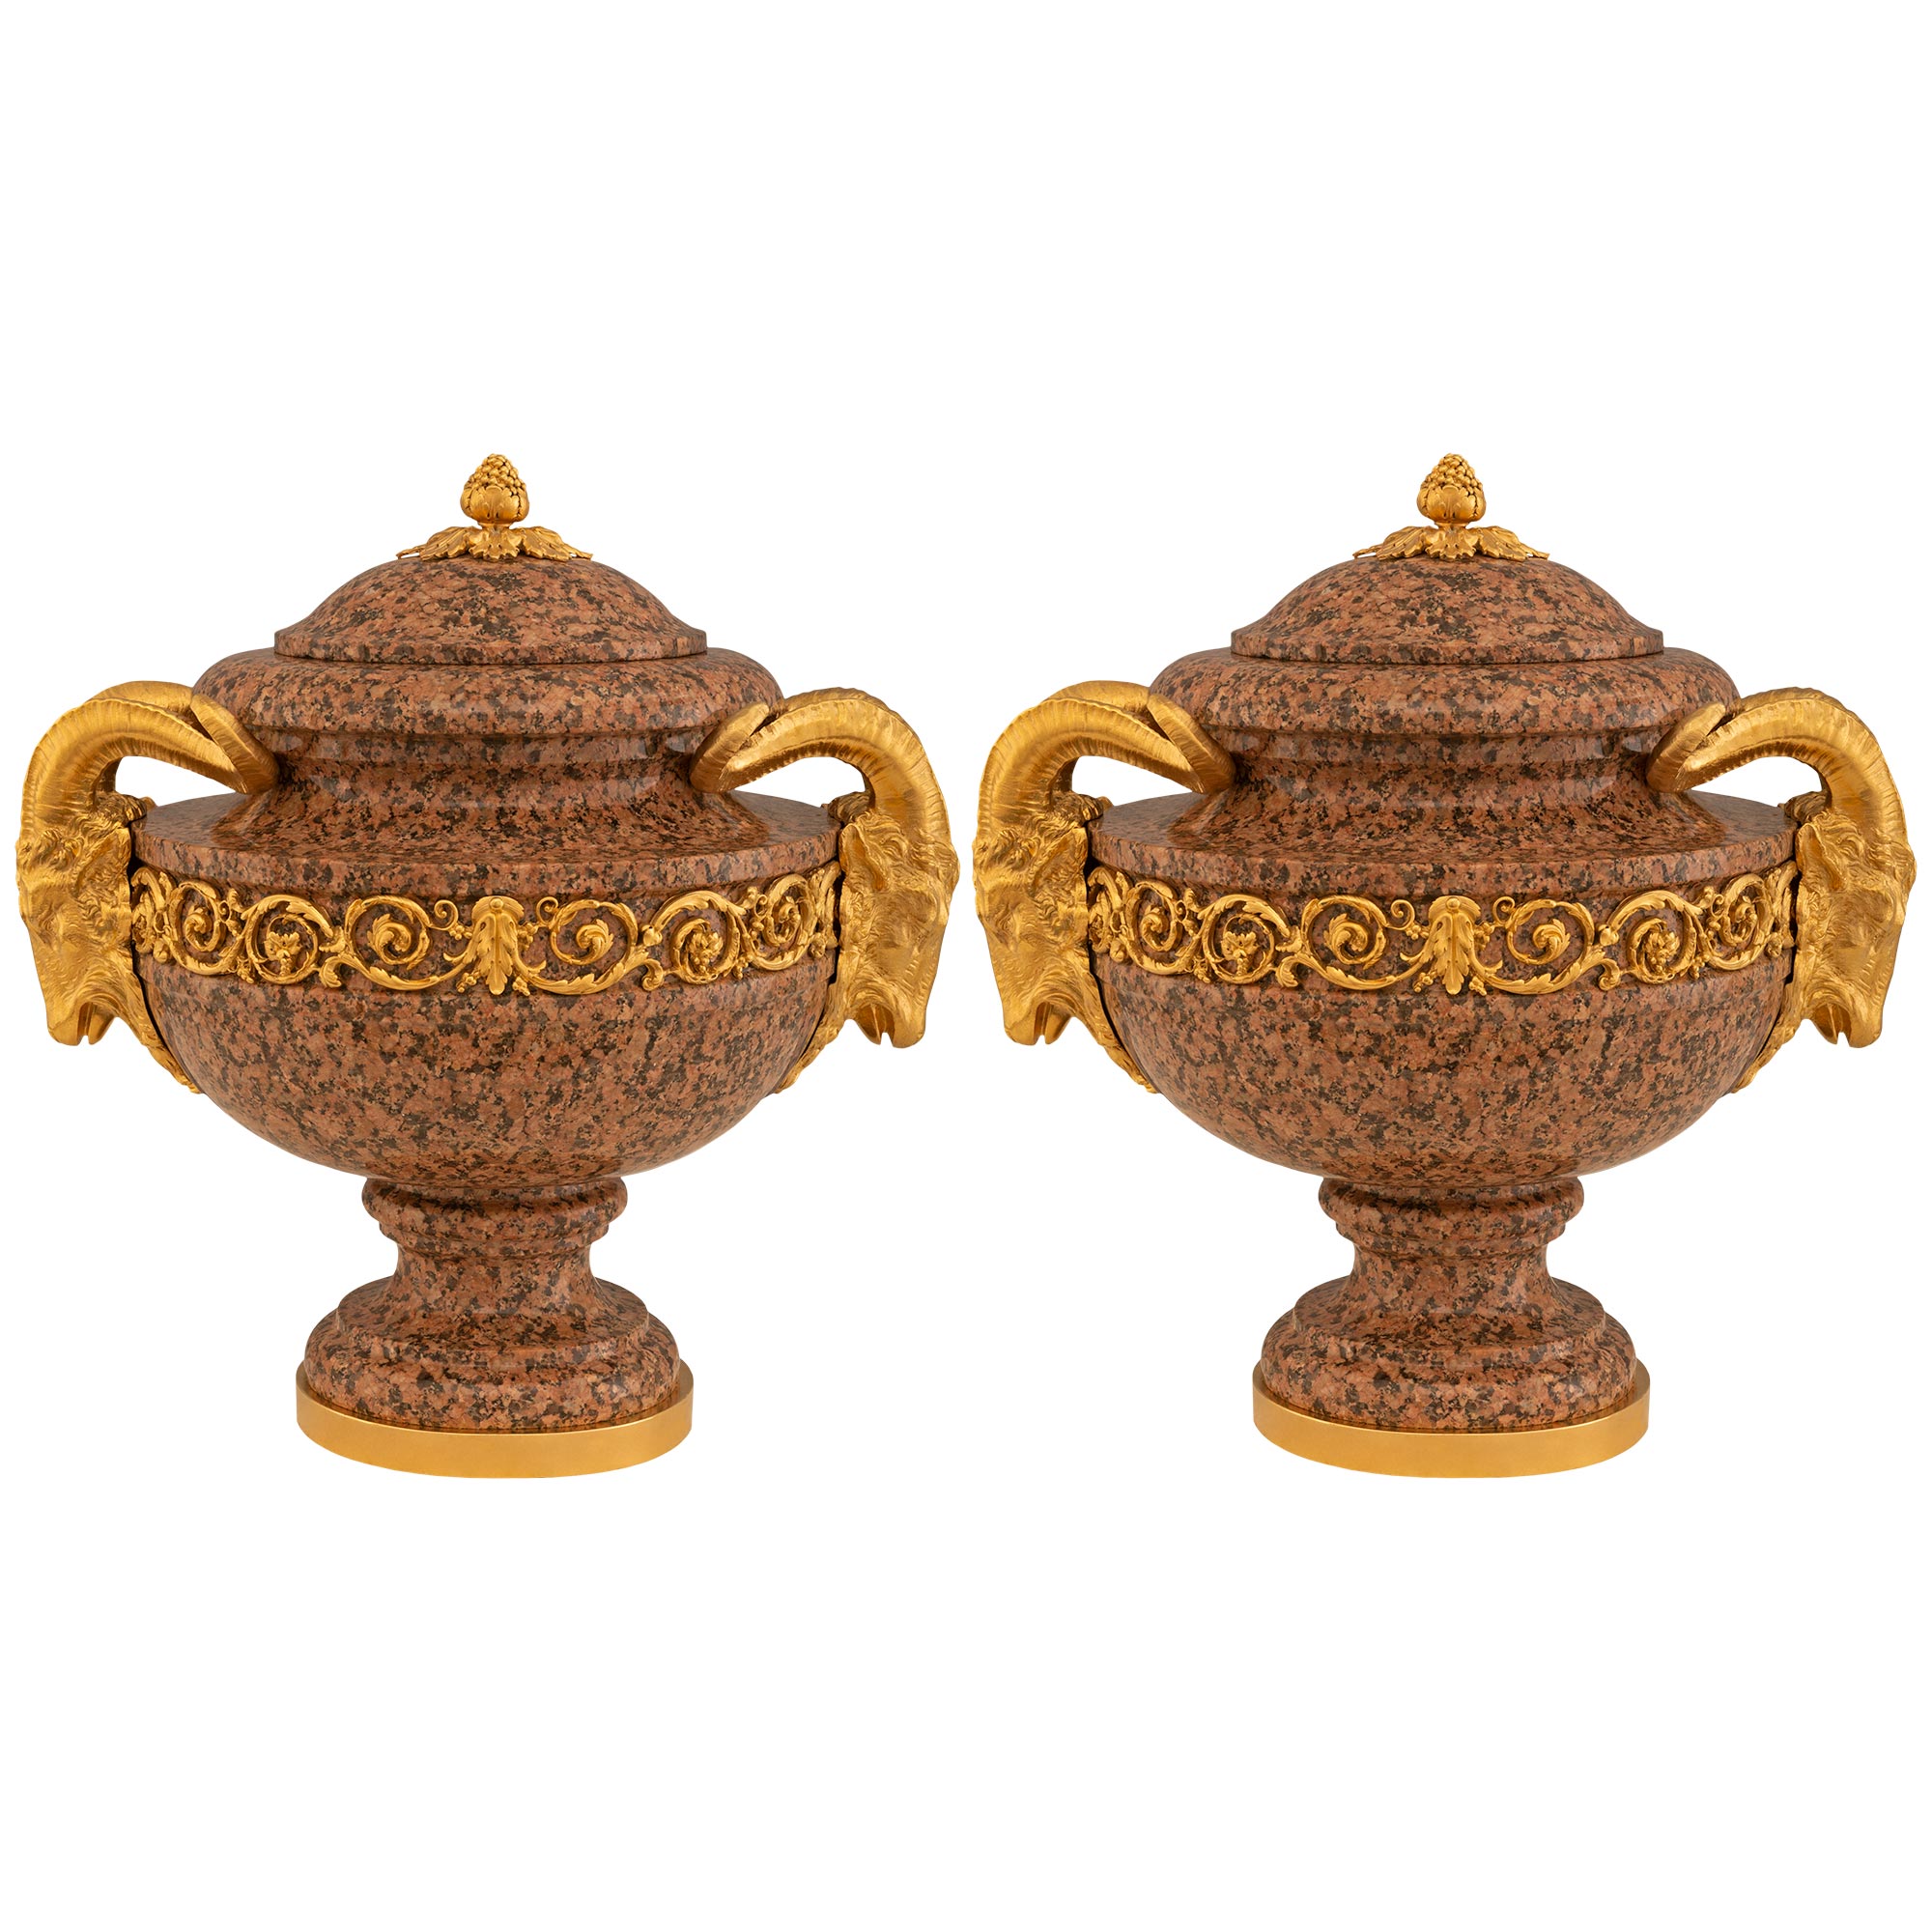 Pair Of French 19th Century Louis XVI St. Pink Granite And Ormolu Lidded Urns